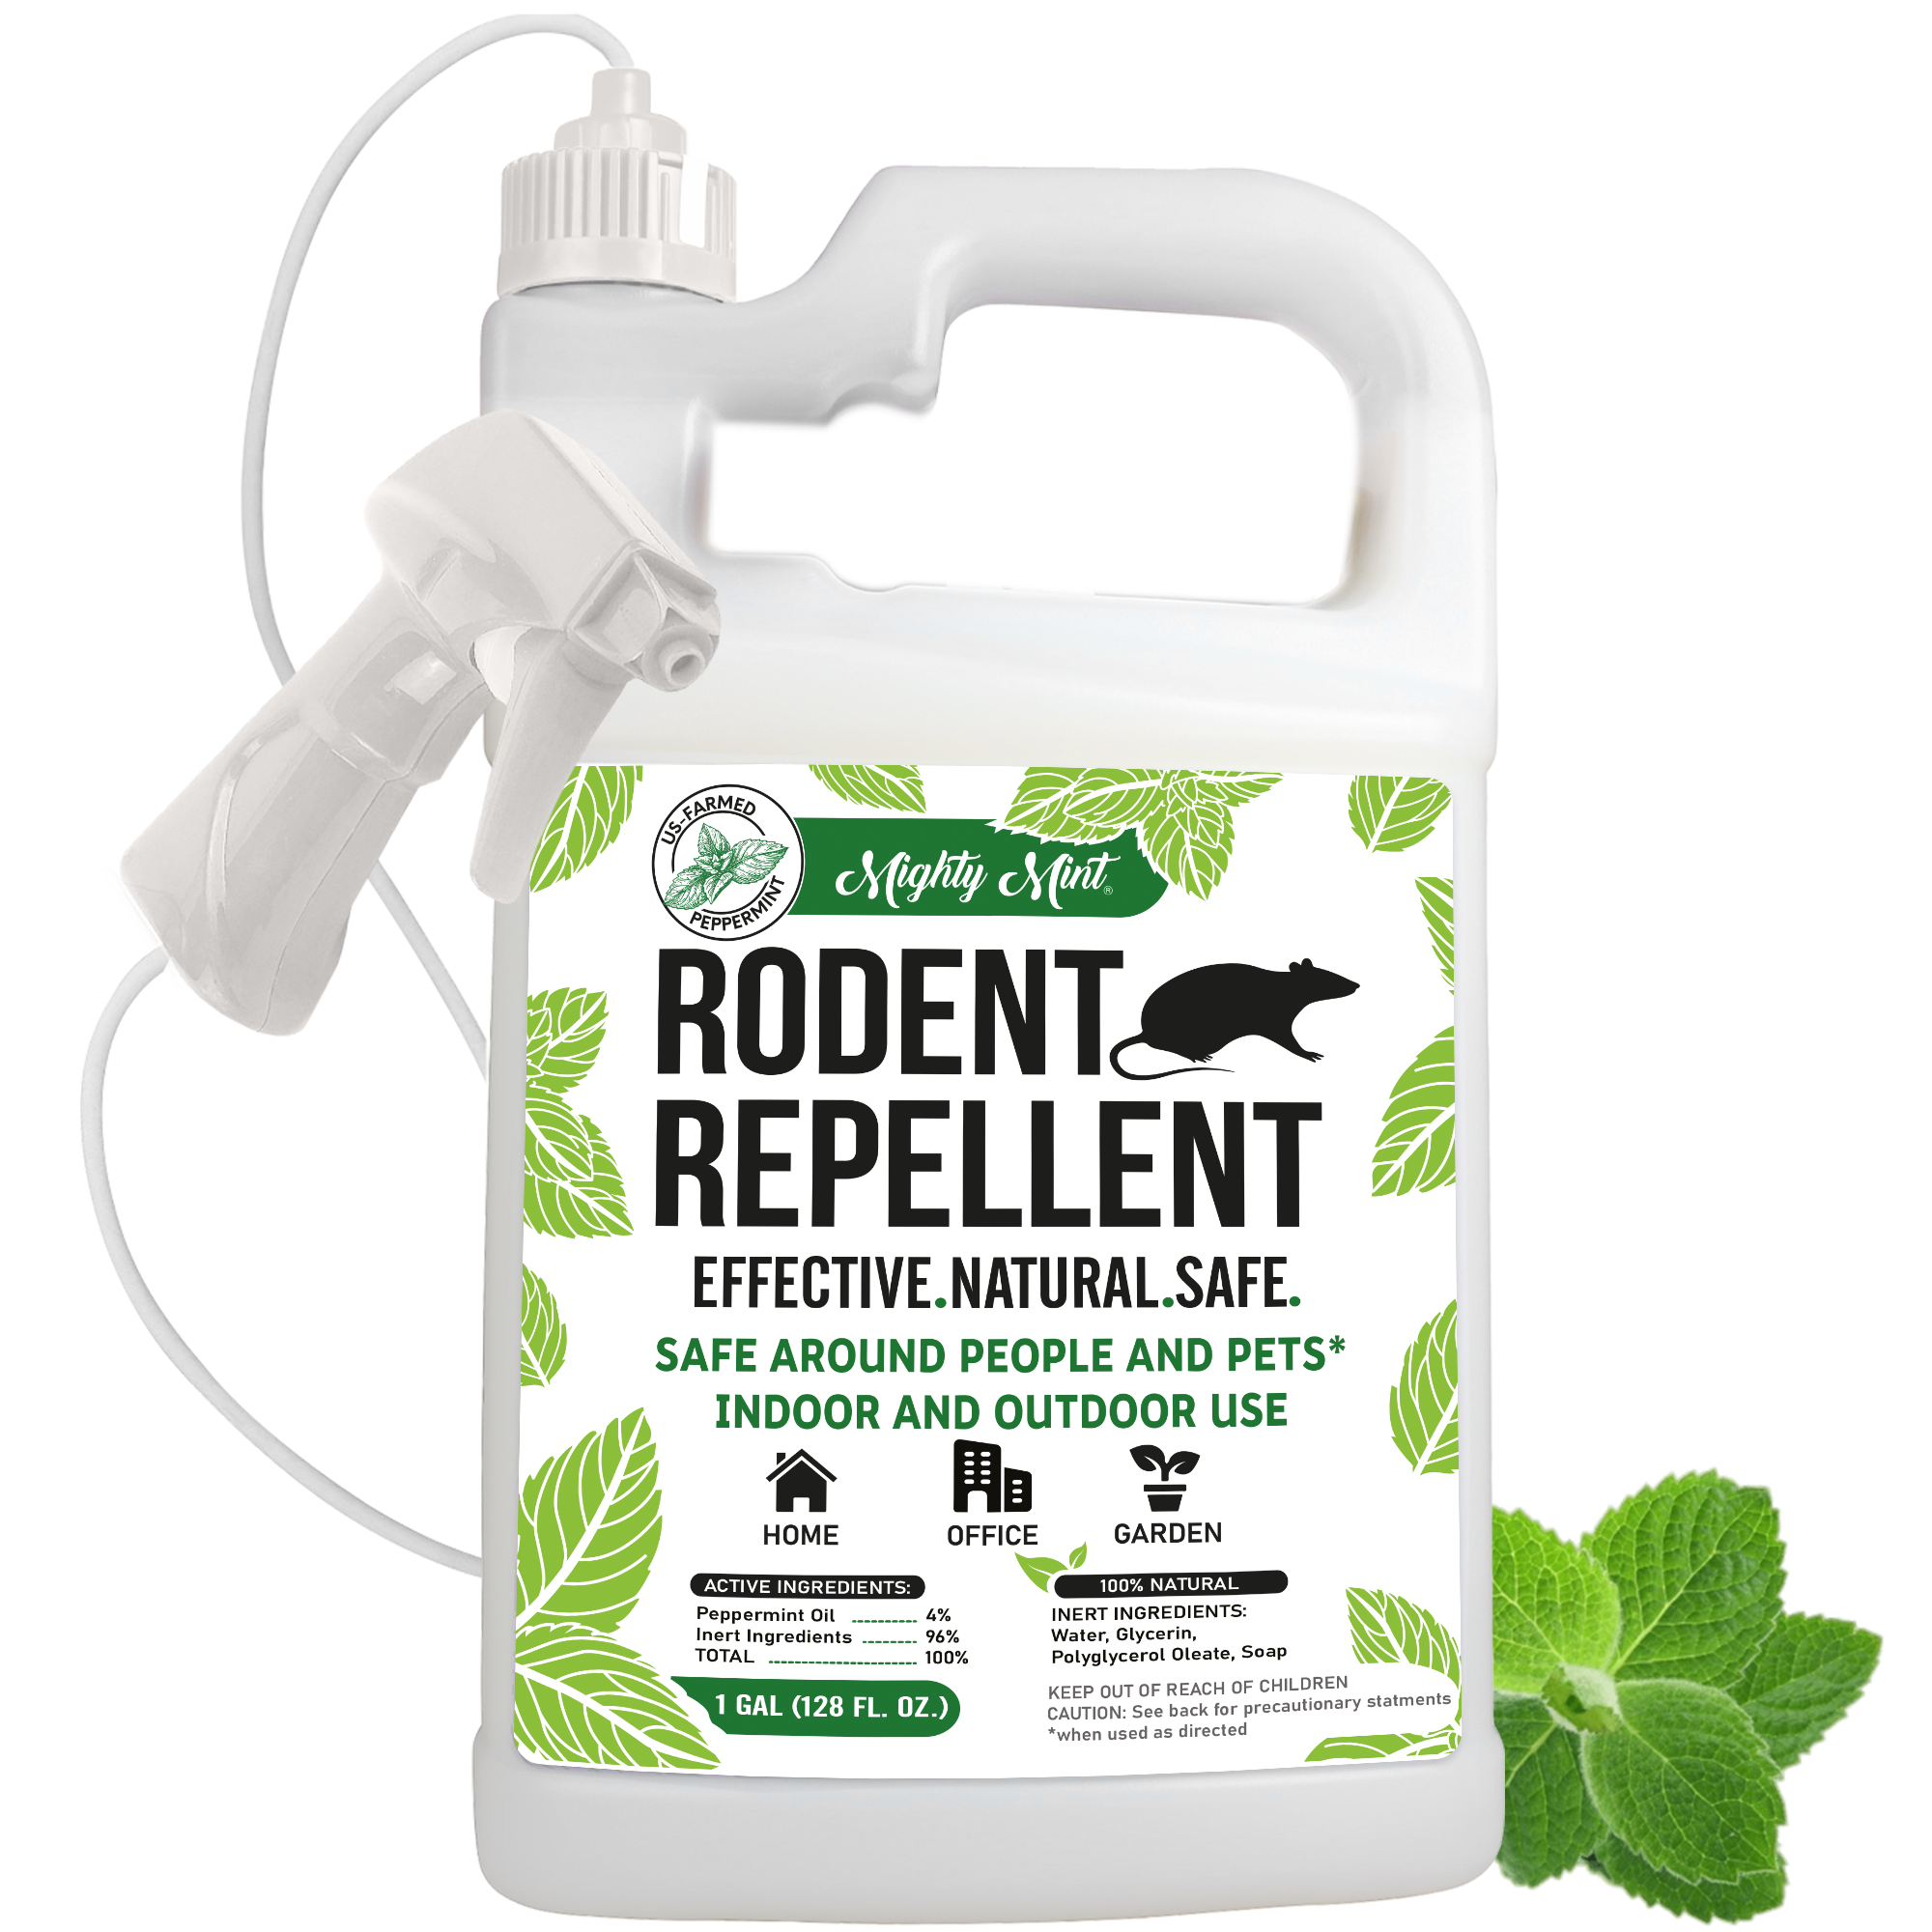 ANEWNICE Rodent Repellent,Mouse Repellent for Cars,Peppermint Rats